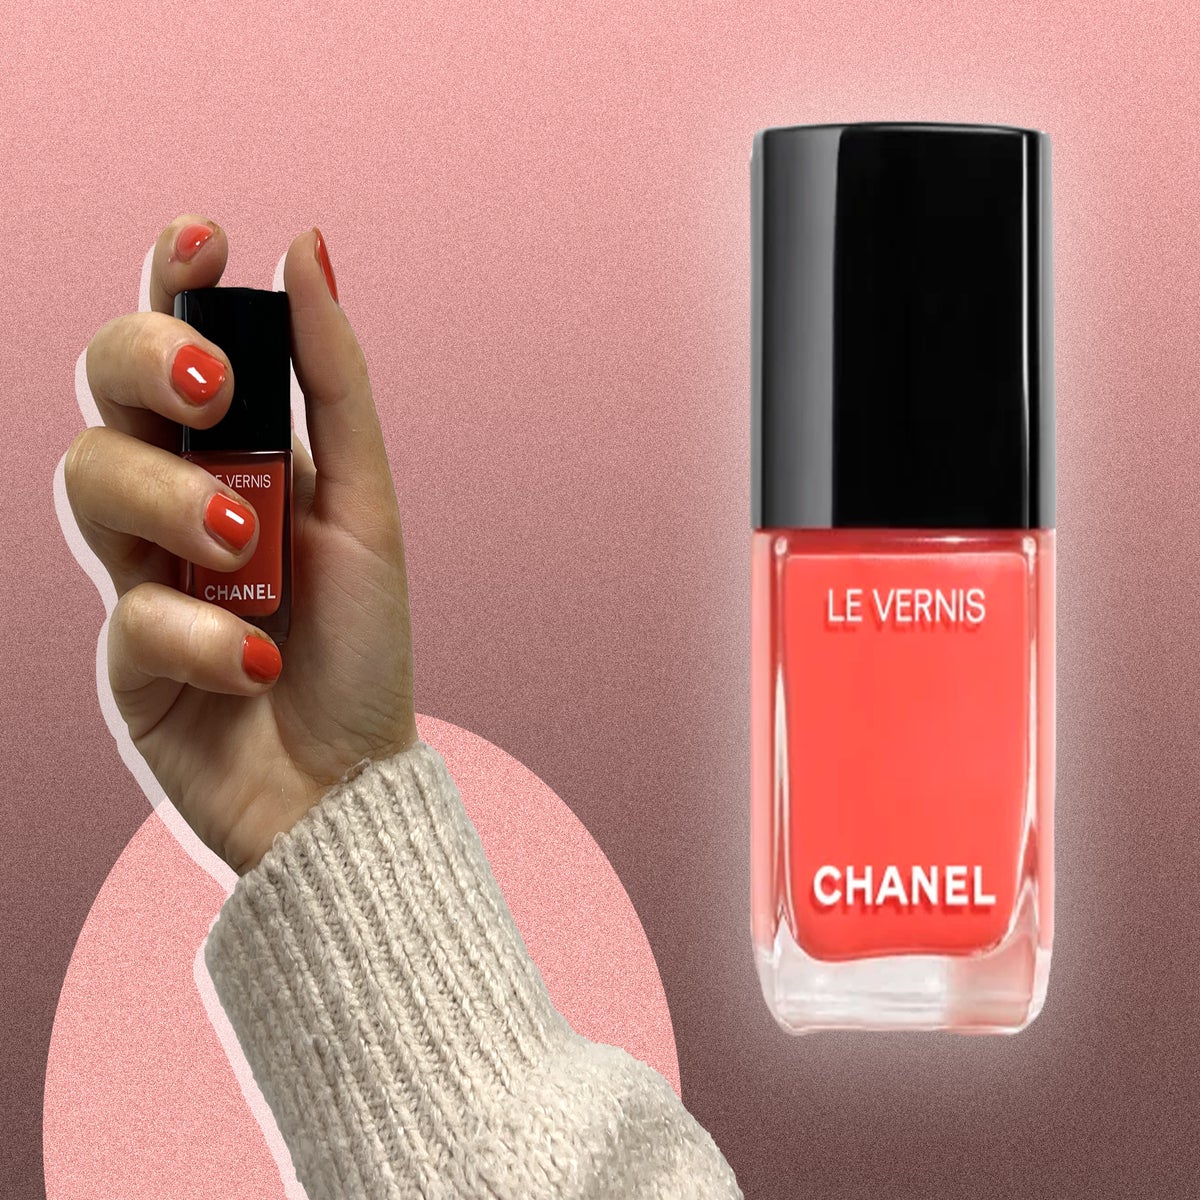 The 10 best red nail polishes, according to experts